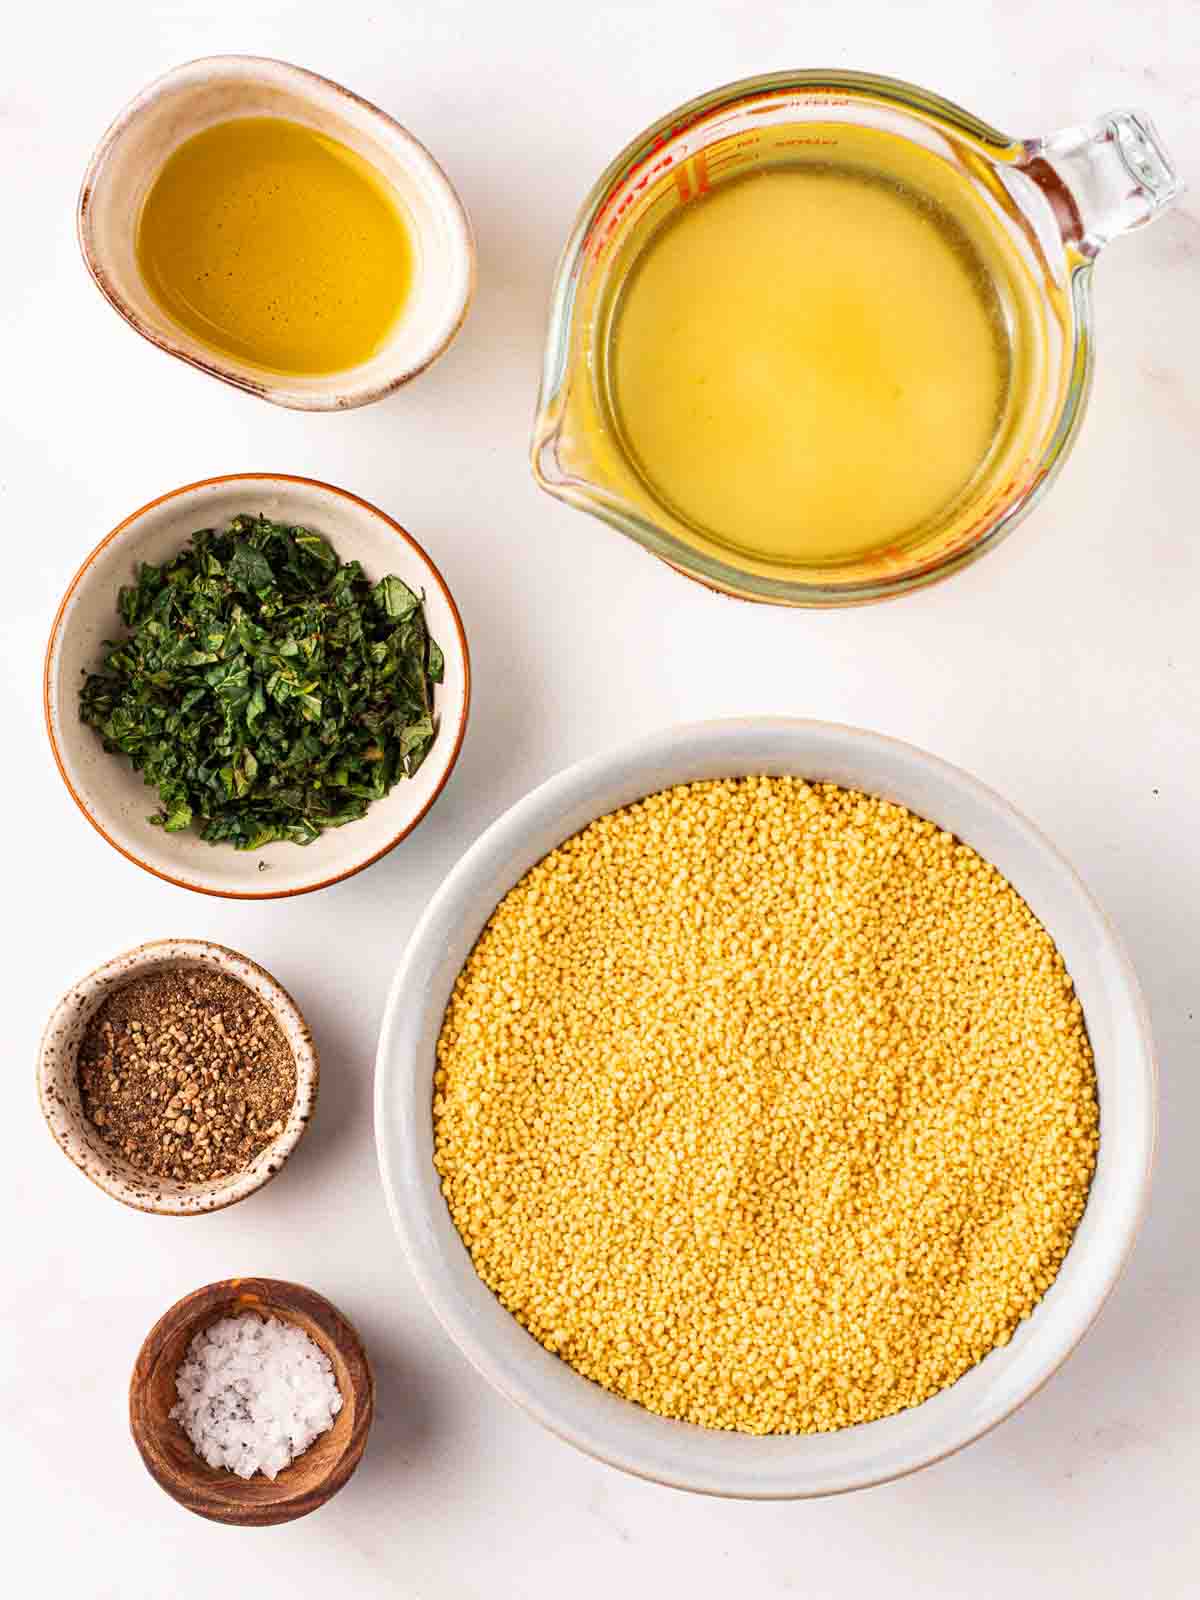 The ingredients for making couscous laid out on a counter top. A view from above.